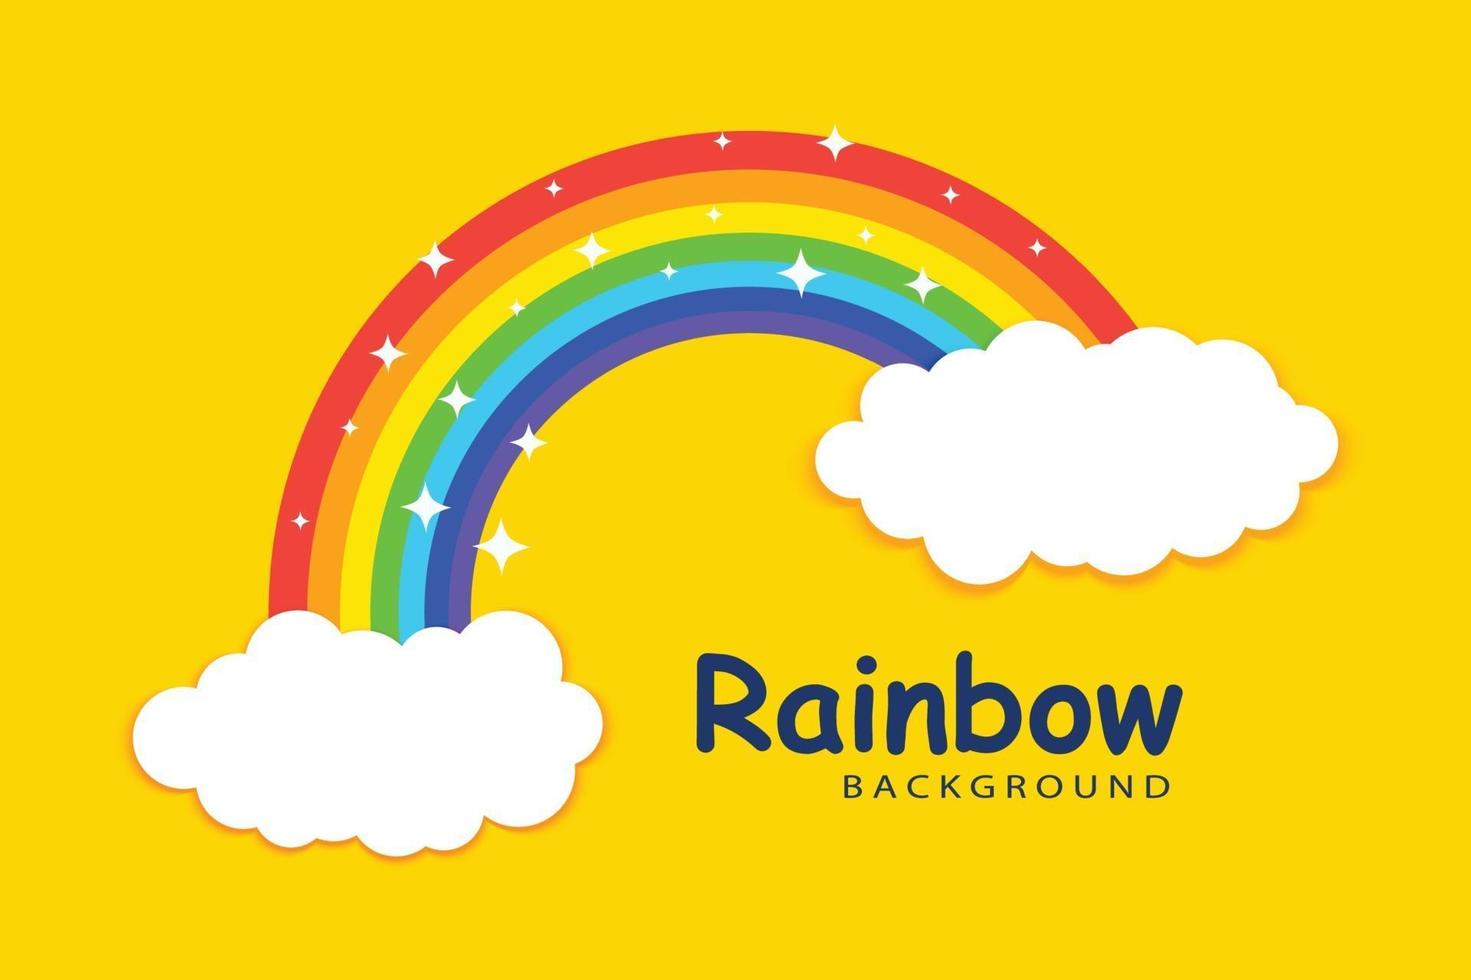 rainbow with clouds background template vector